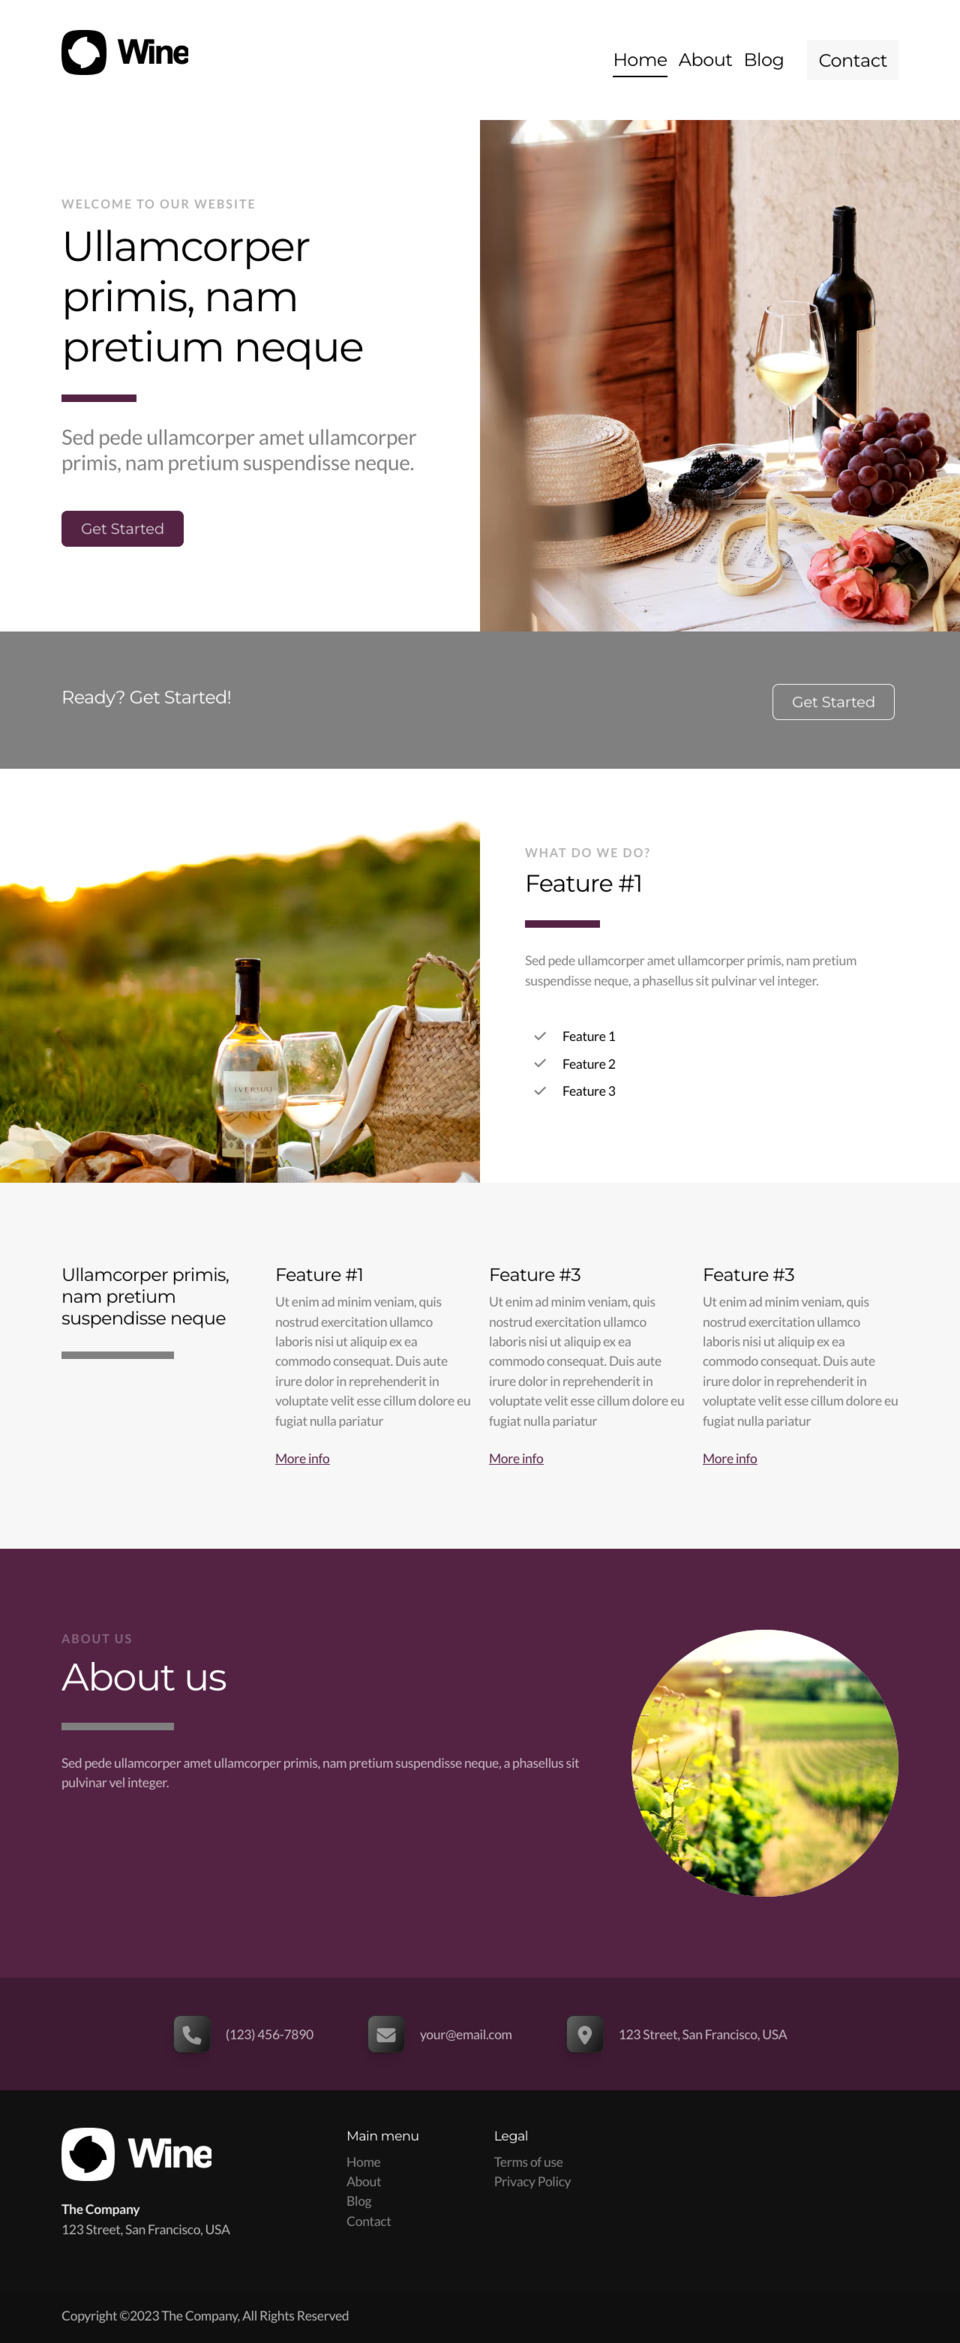 Wine Website Template - Ideal for Wineries, Wine Bars, Wine Shops, Wine Clubs, and Wine Enthusiasts